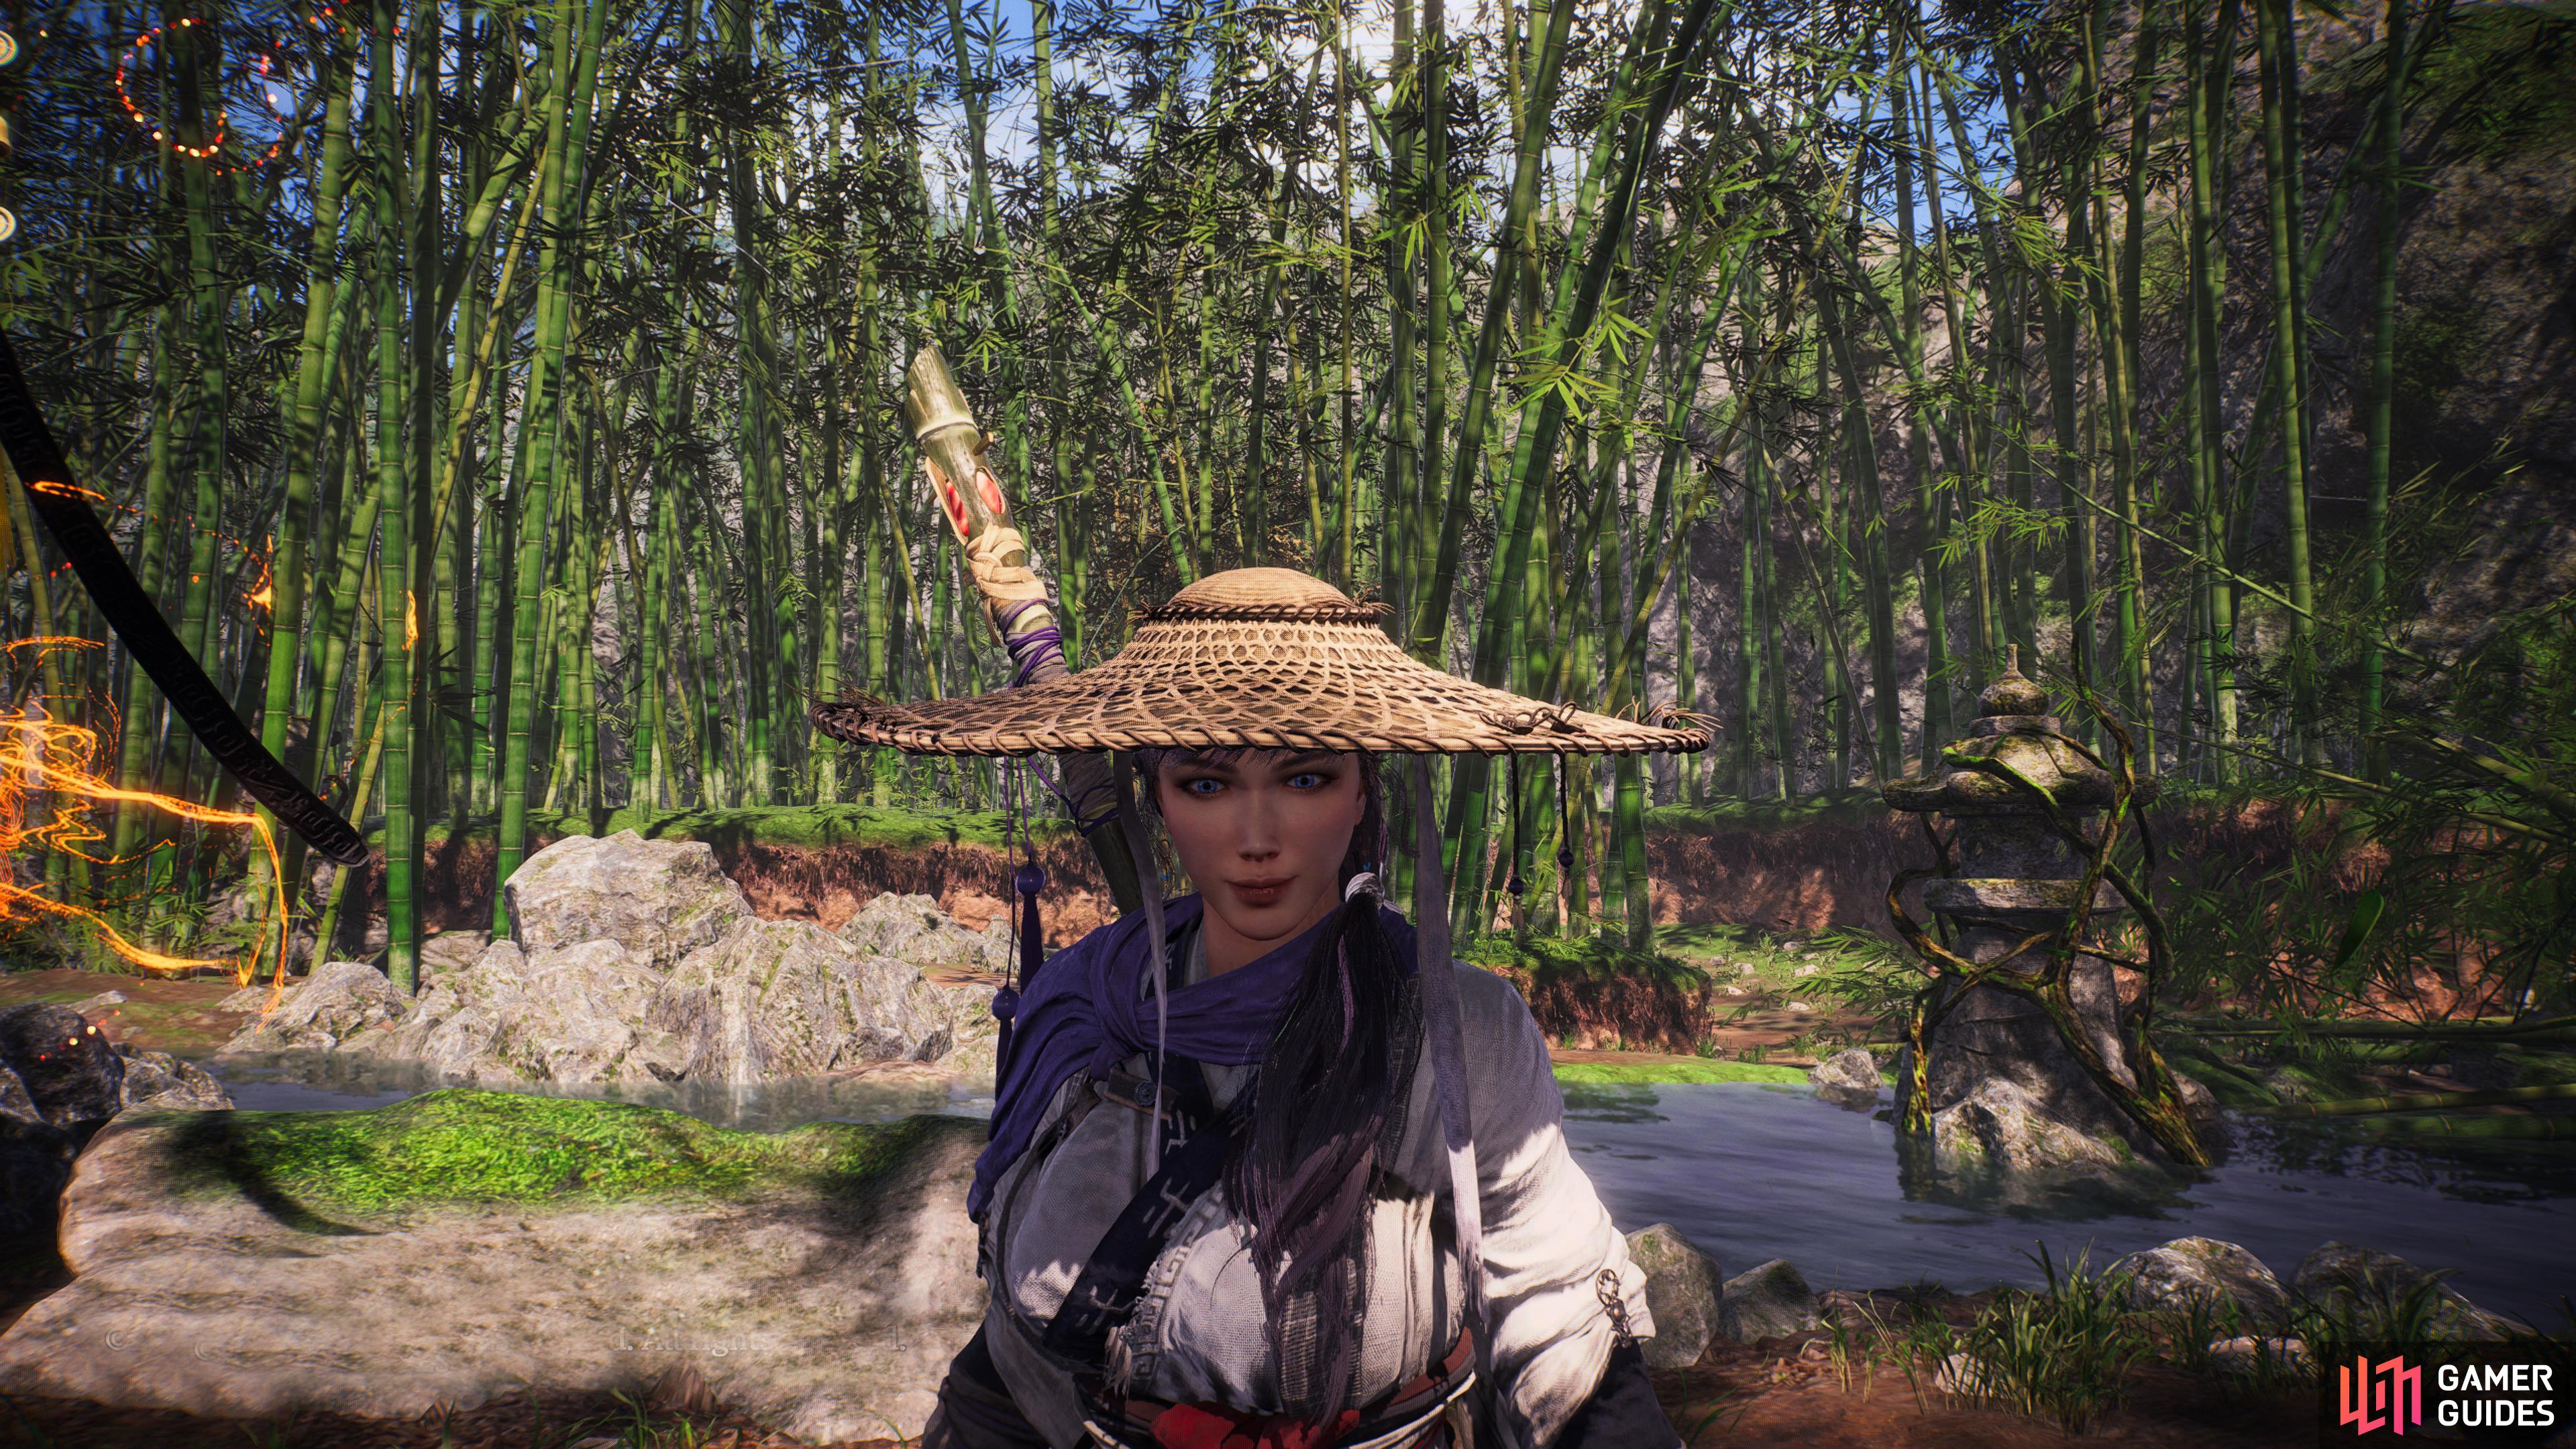 The Tianzhu Hermit Conical Hat is a bamboo-woven hat that is adorned with knotted decorations that bring good luck to its wearer.